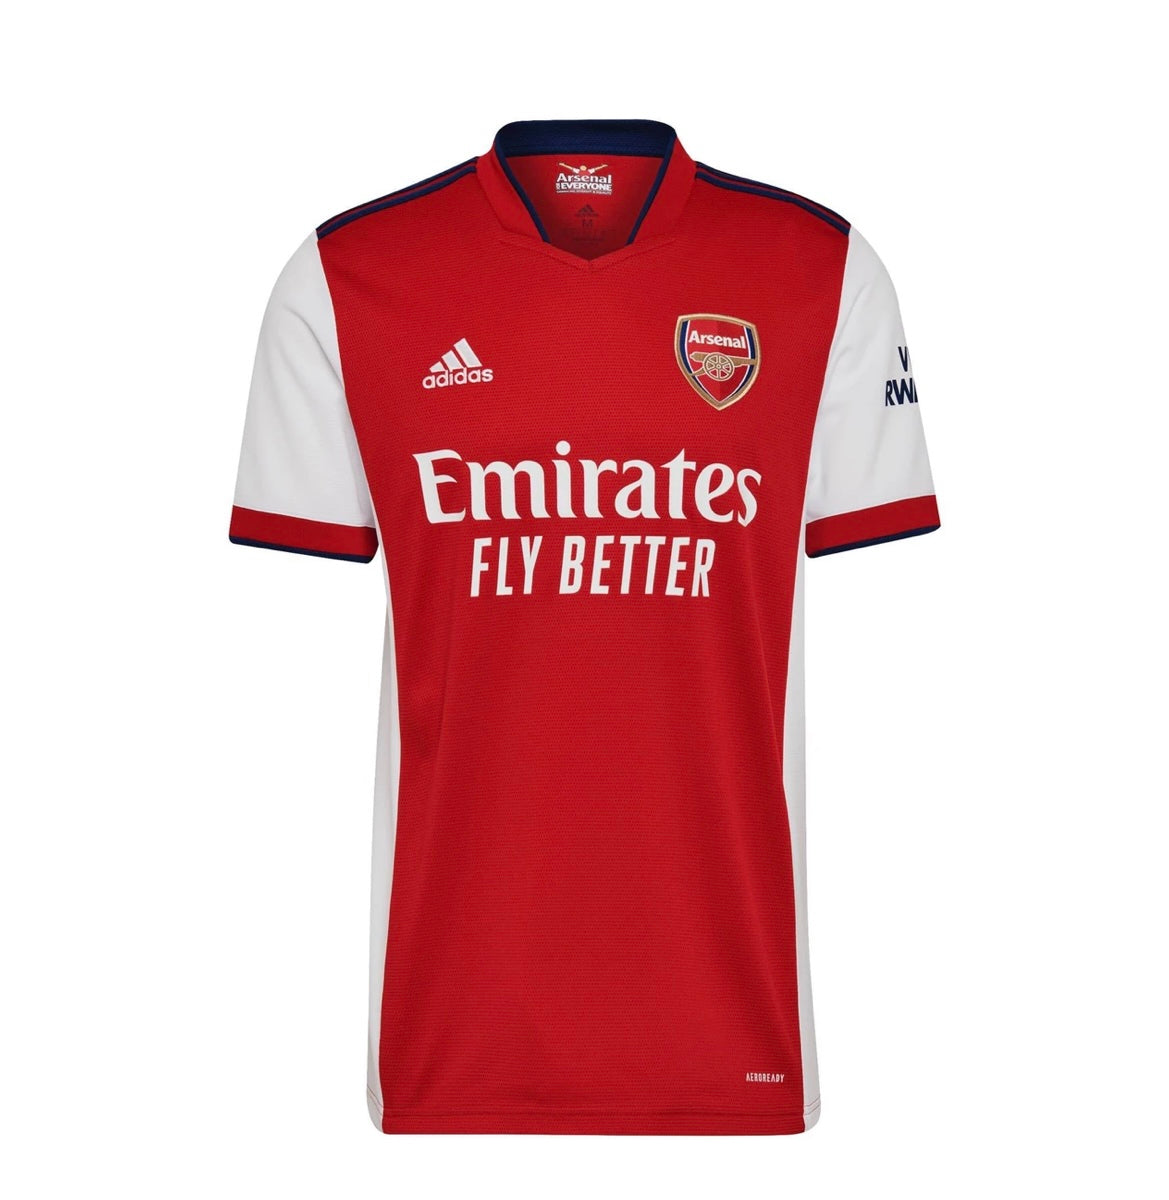 Arsenal FC Adidas 21-22 White / Scarlet Home Jersey - Pro League